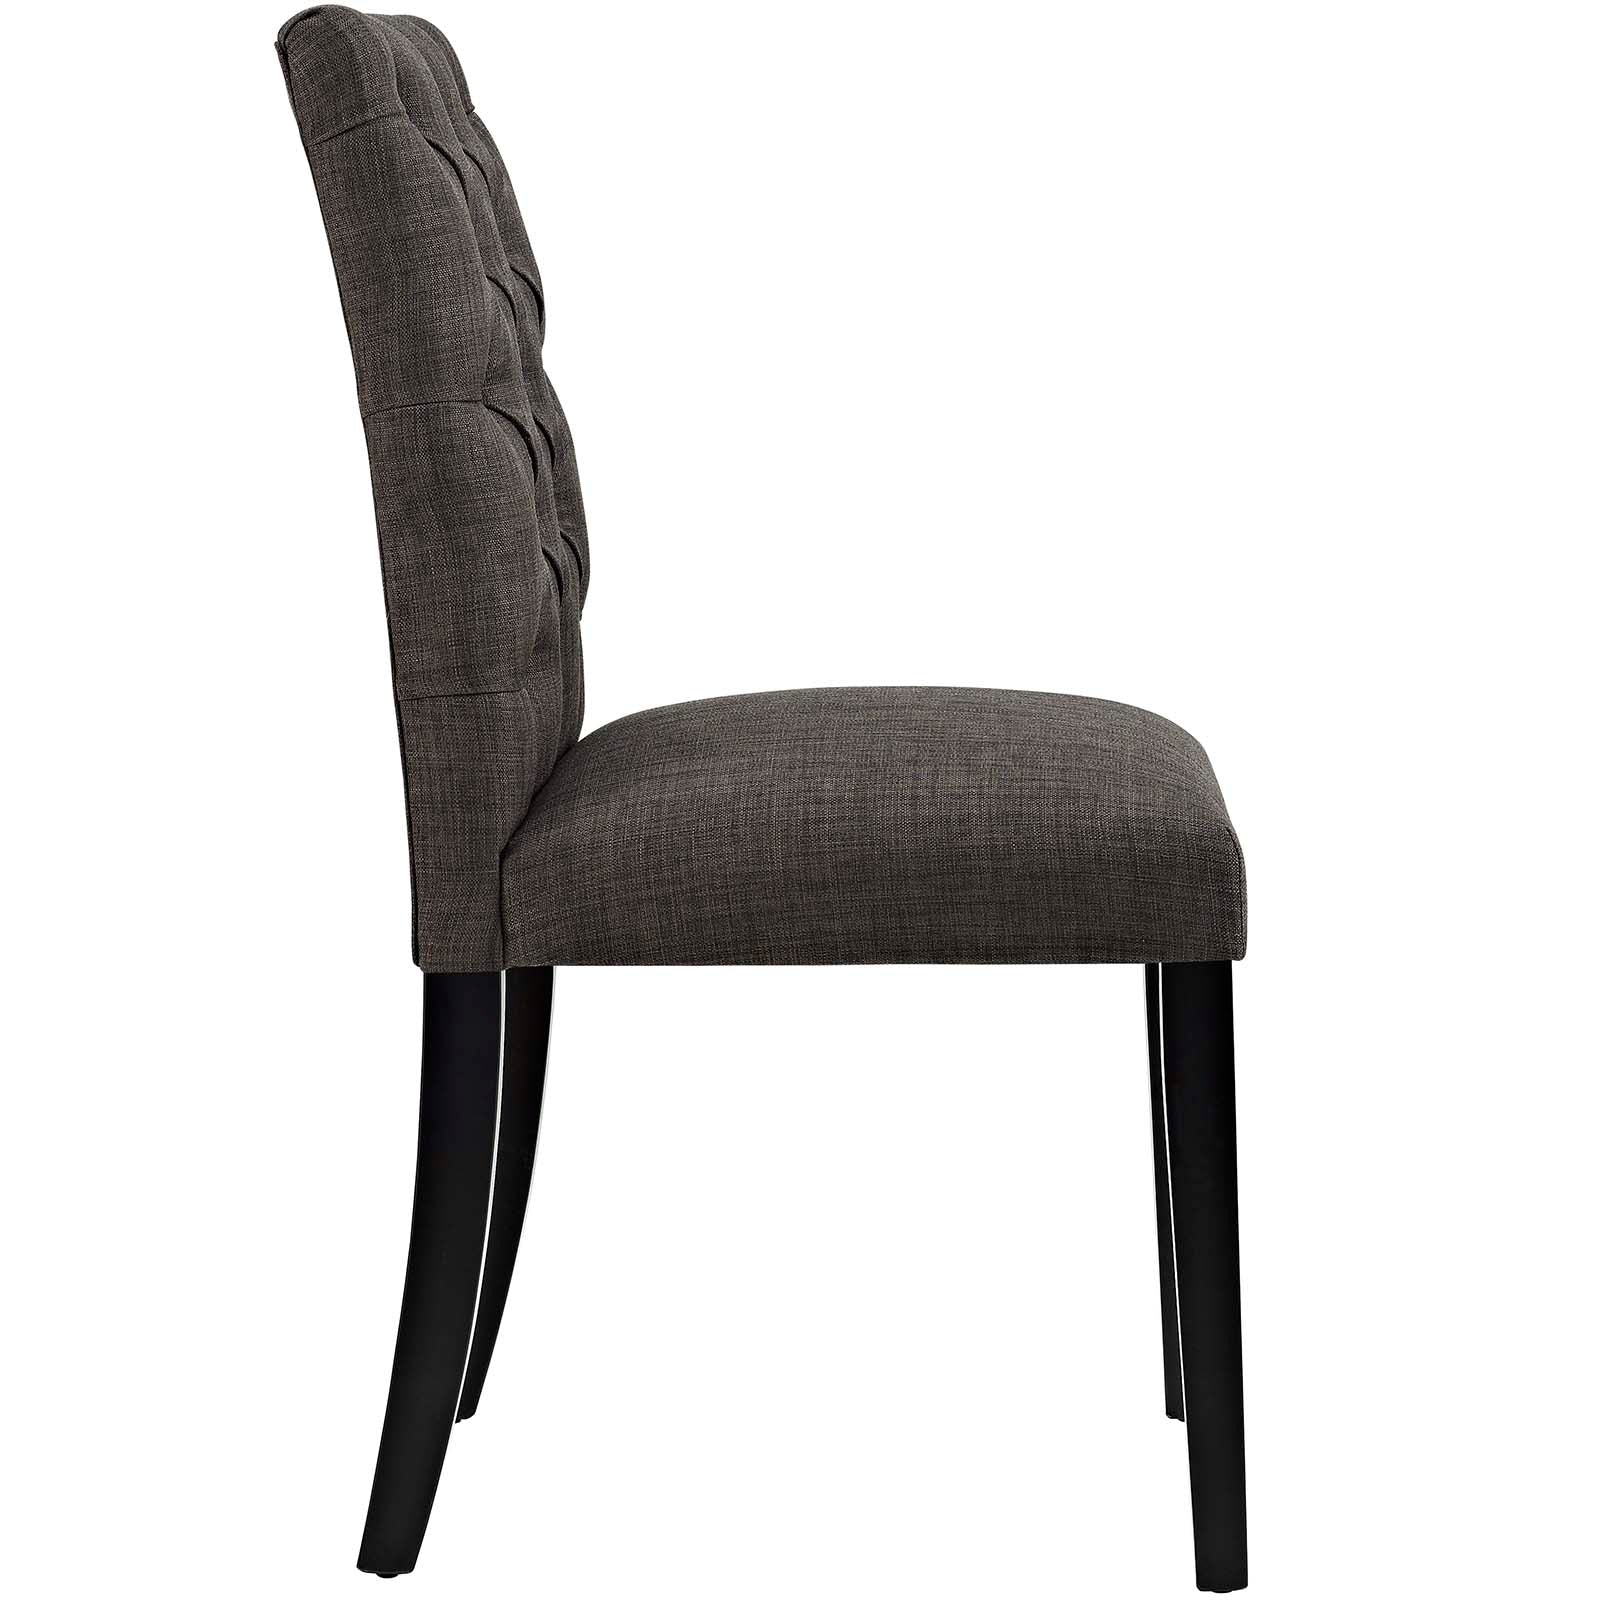 Modway Dining Chairs - Duchess Fabric Dining Chair Brown